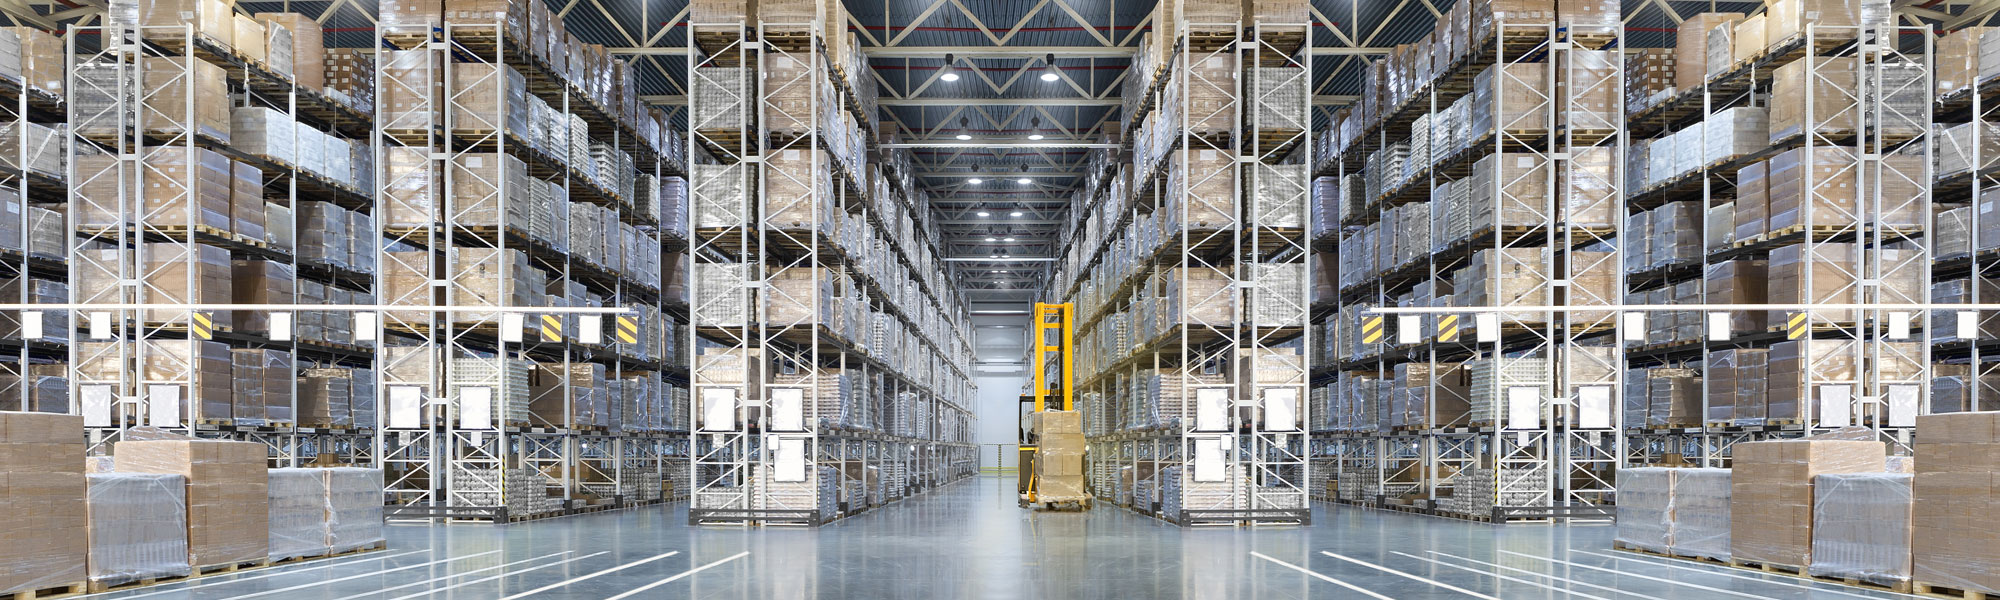 Yellow forklift in large warehouse